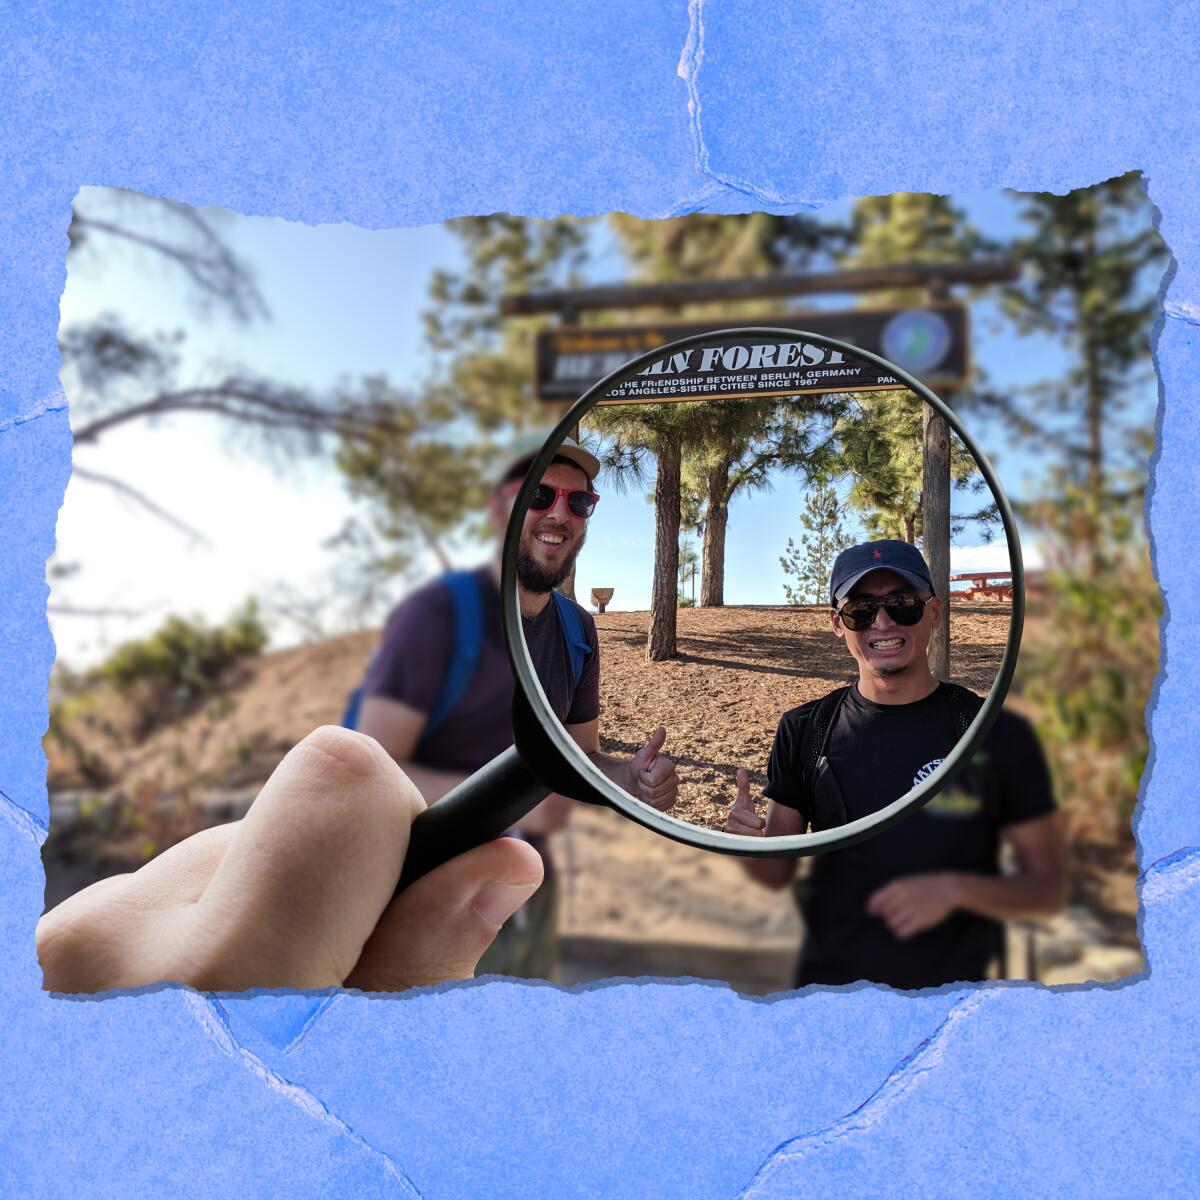 Two people and a forest sign are seen through a magnifying lens.